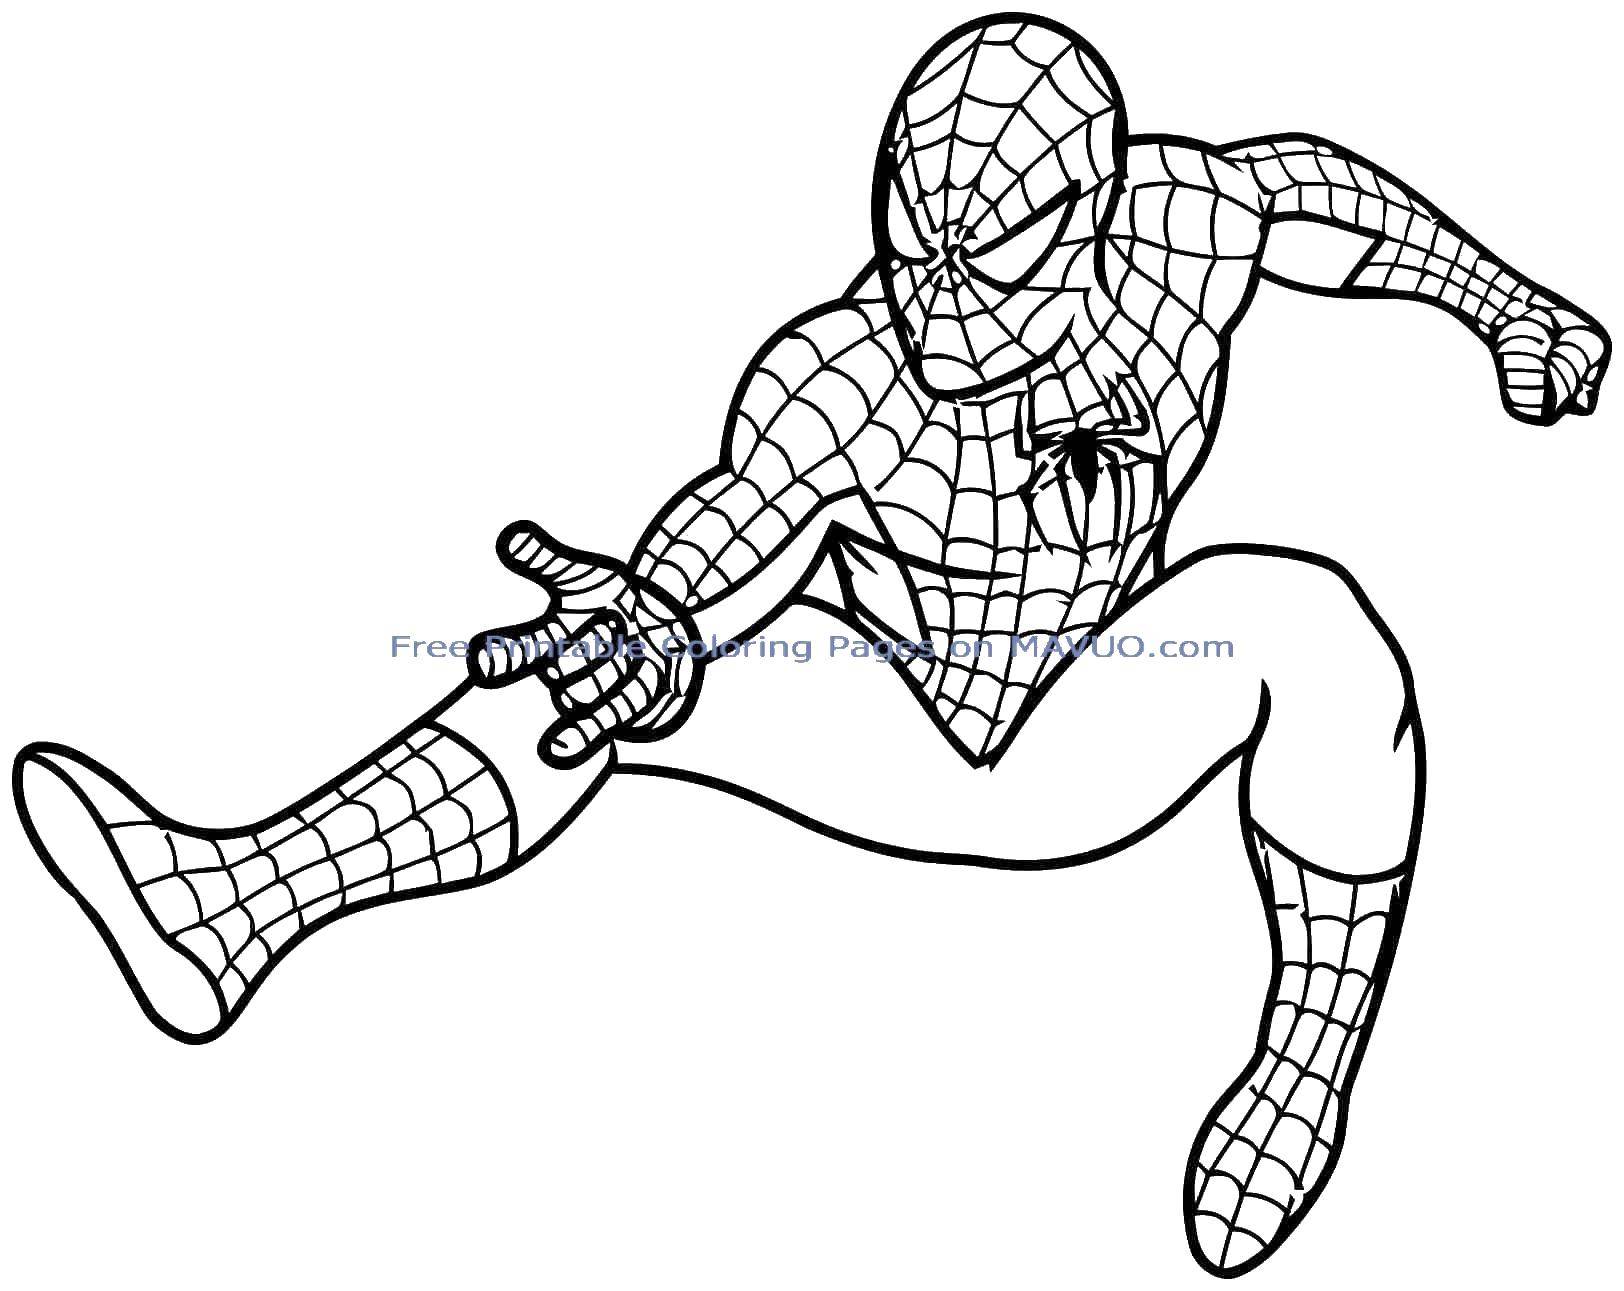 Coloring Spiderman. Category Cartoon character. Tags:  Spiderman, Spiderman.